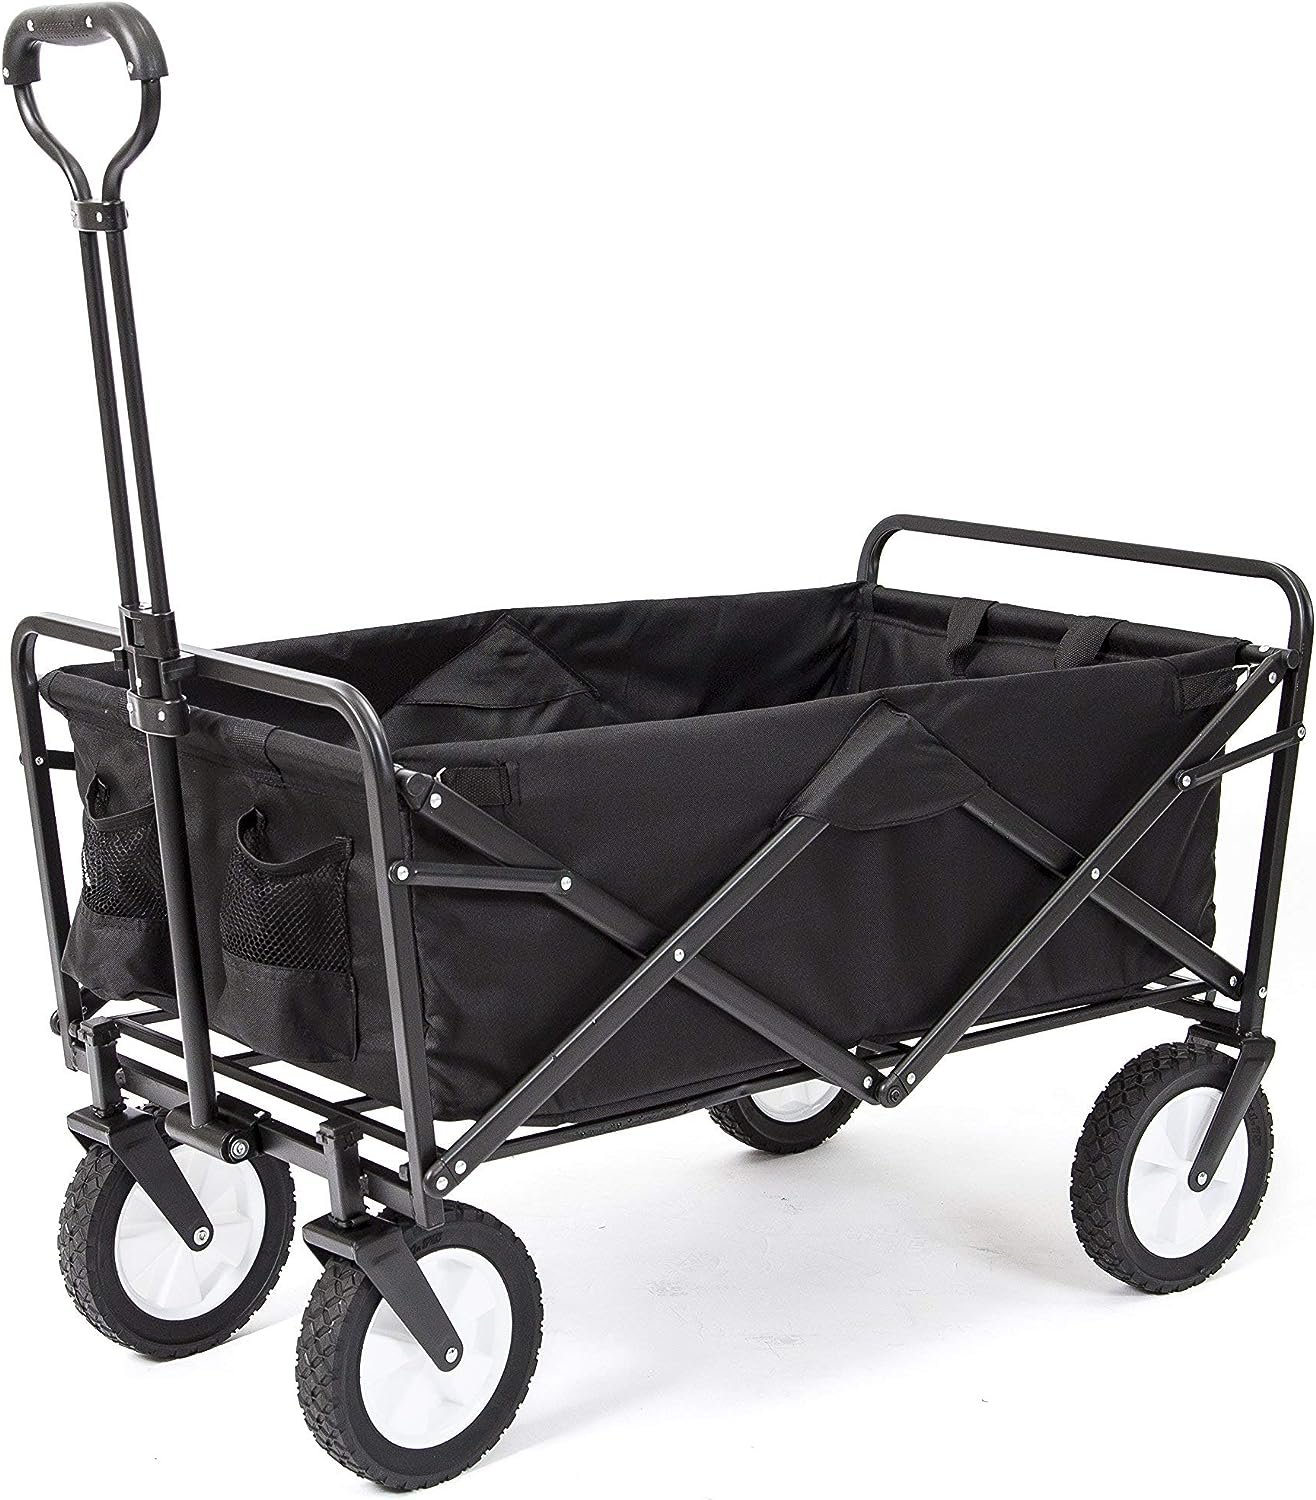 MacSports Collapsible Folding Outdoor Utility Wagon Review